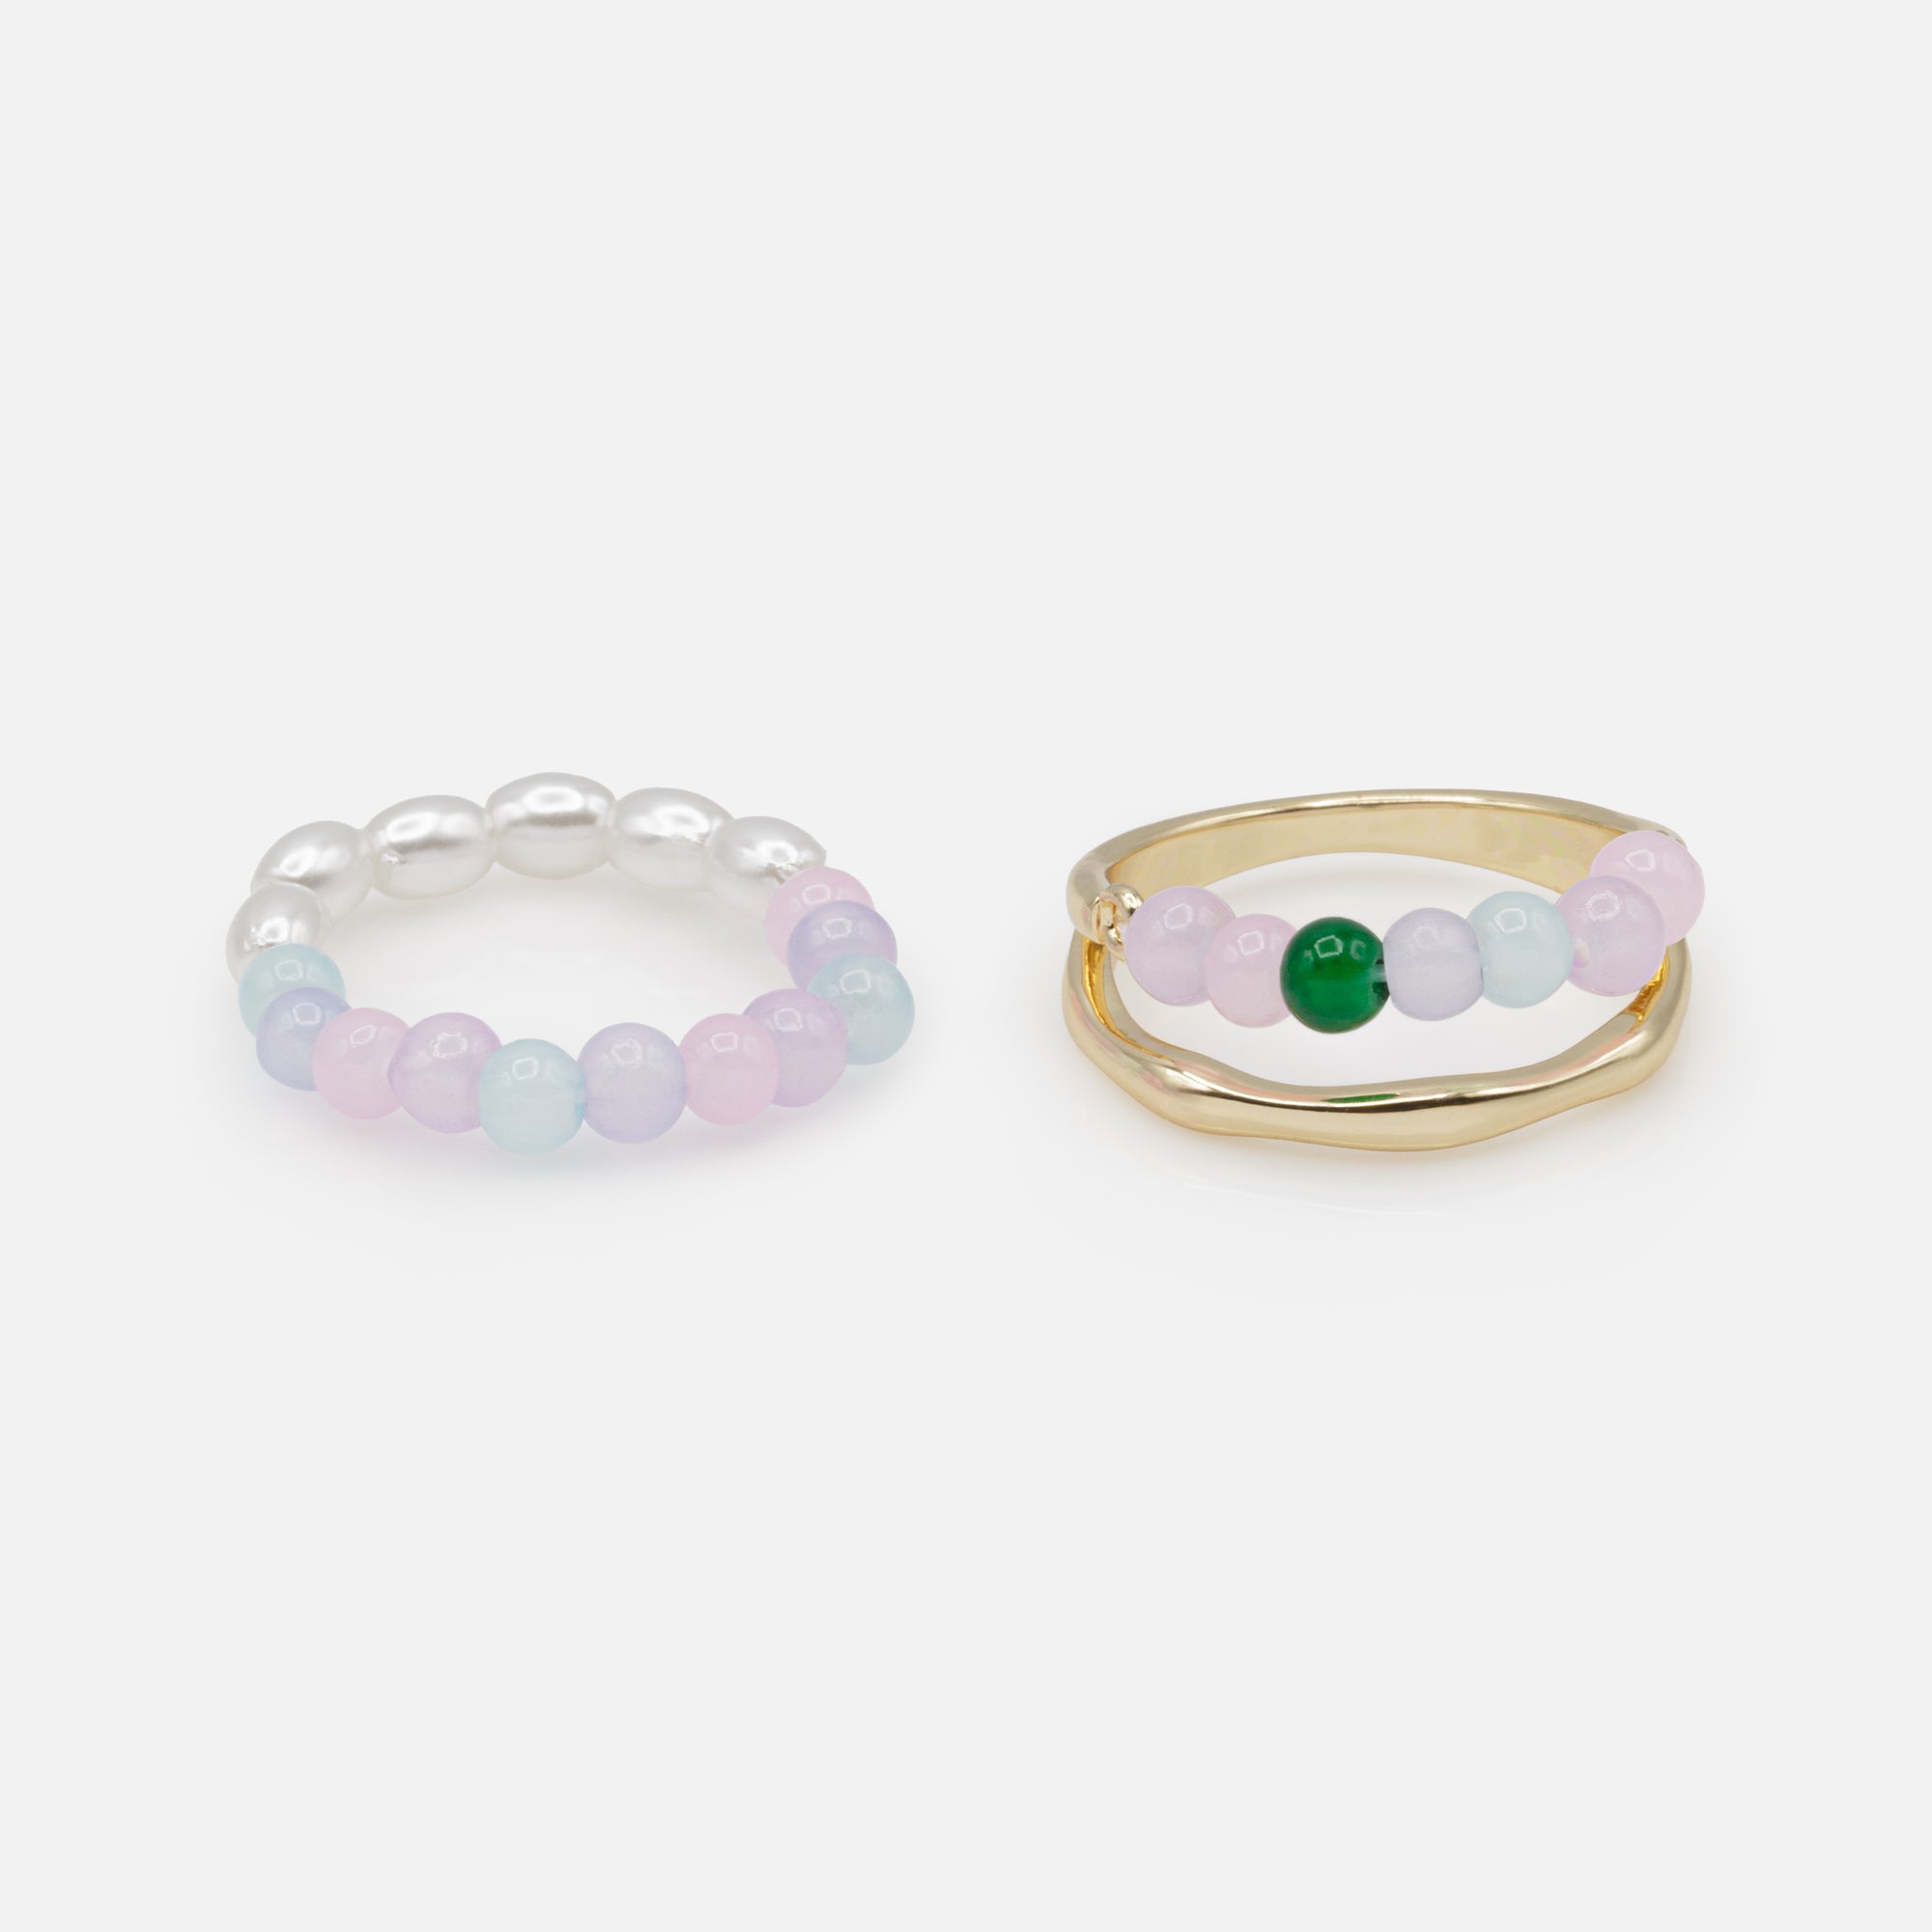 Duo of golden and expandable rings with colored beads